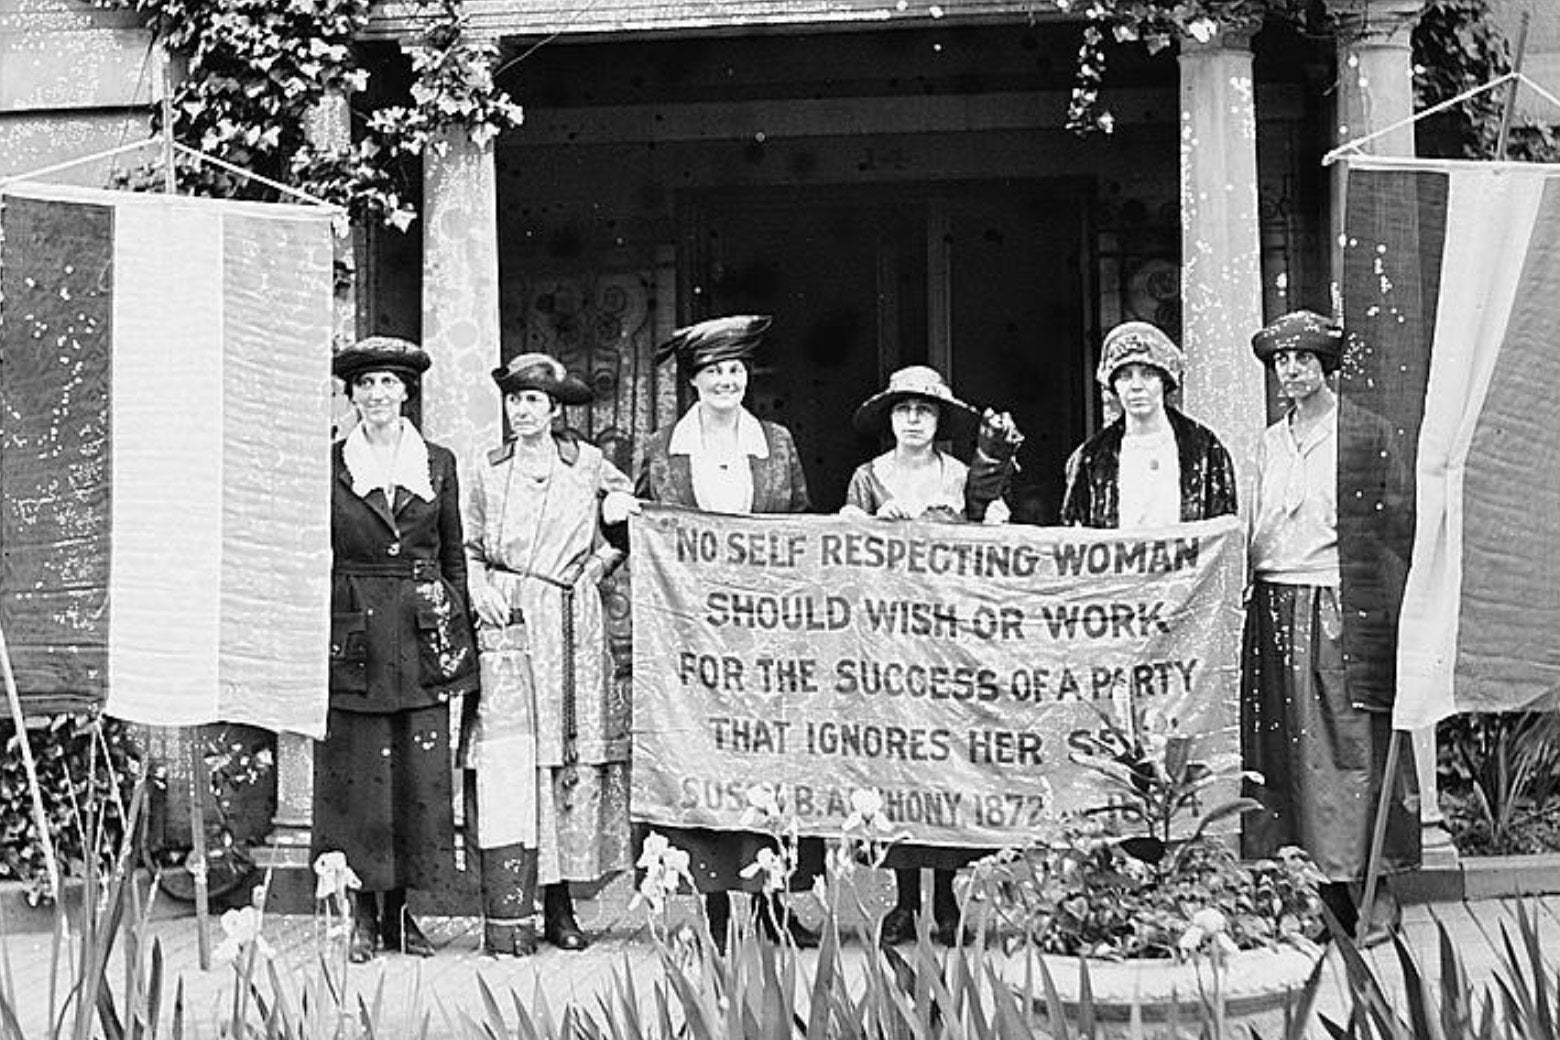 Suffragists Sue White, Benigna Green Kalb, Jas Rector, Mary Dubrow, Alice Paul, and Elizabeth Kalb stand in front of the National Woman’s Party Washington HQ holding a sign with a Susan B. Anthony quote.